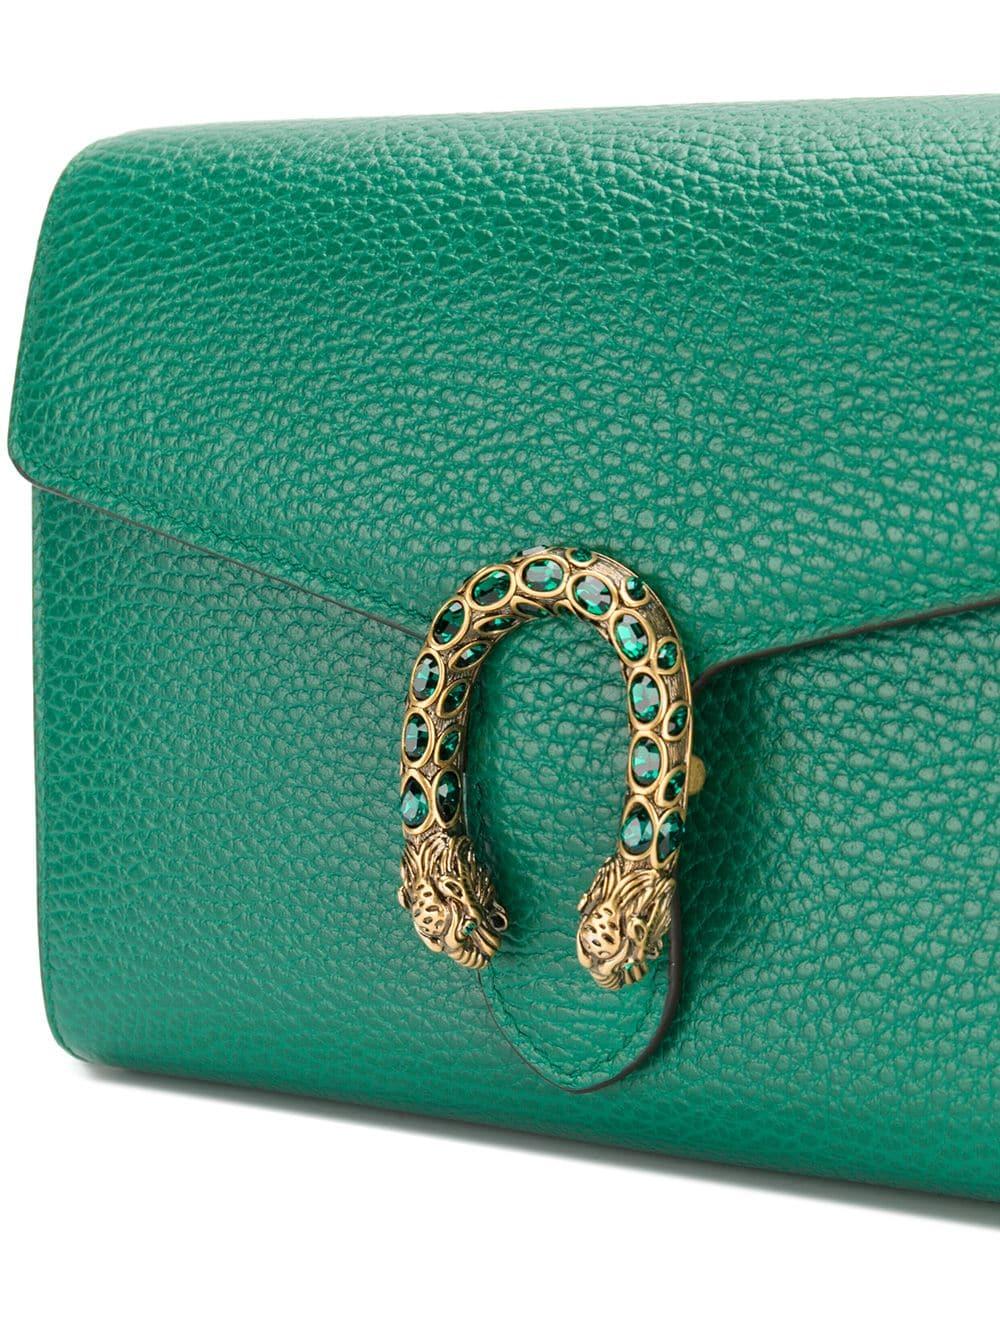 Gucci Leather Dionysus Shoulder Bag in Green - Lyst